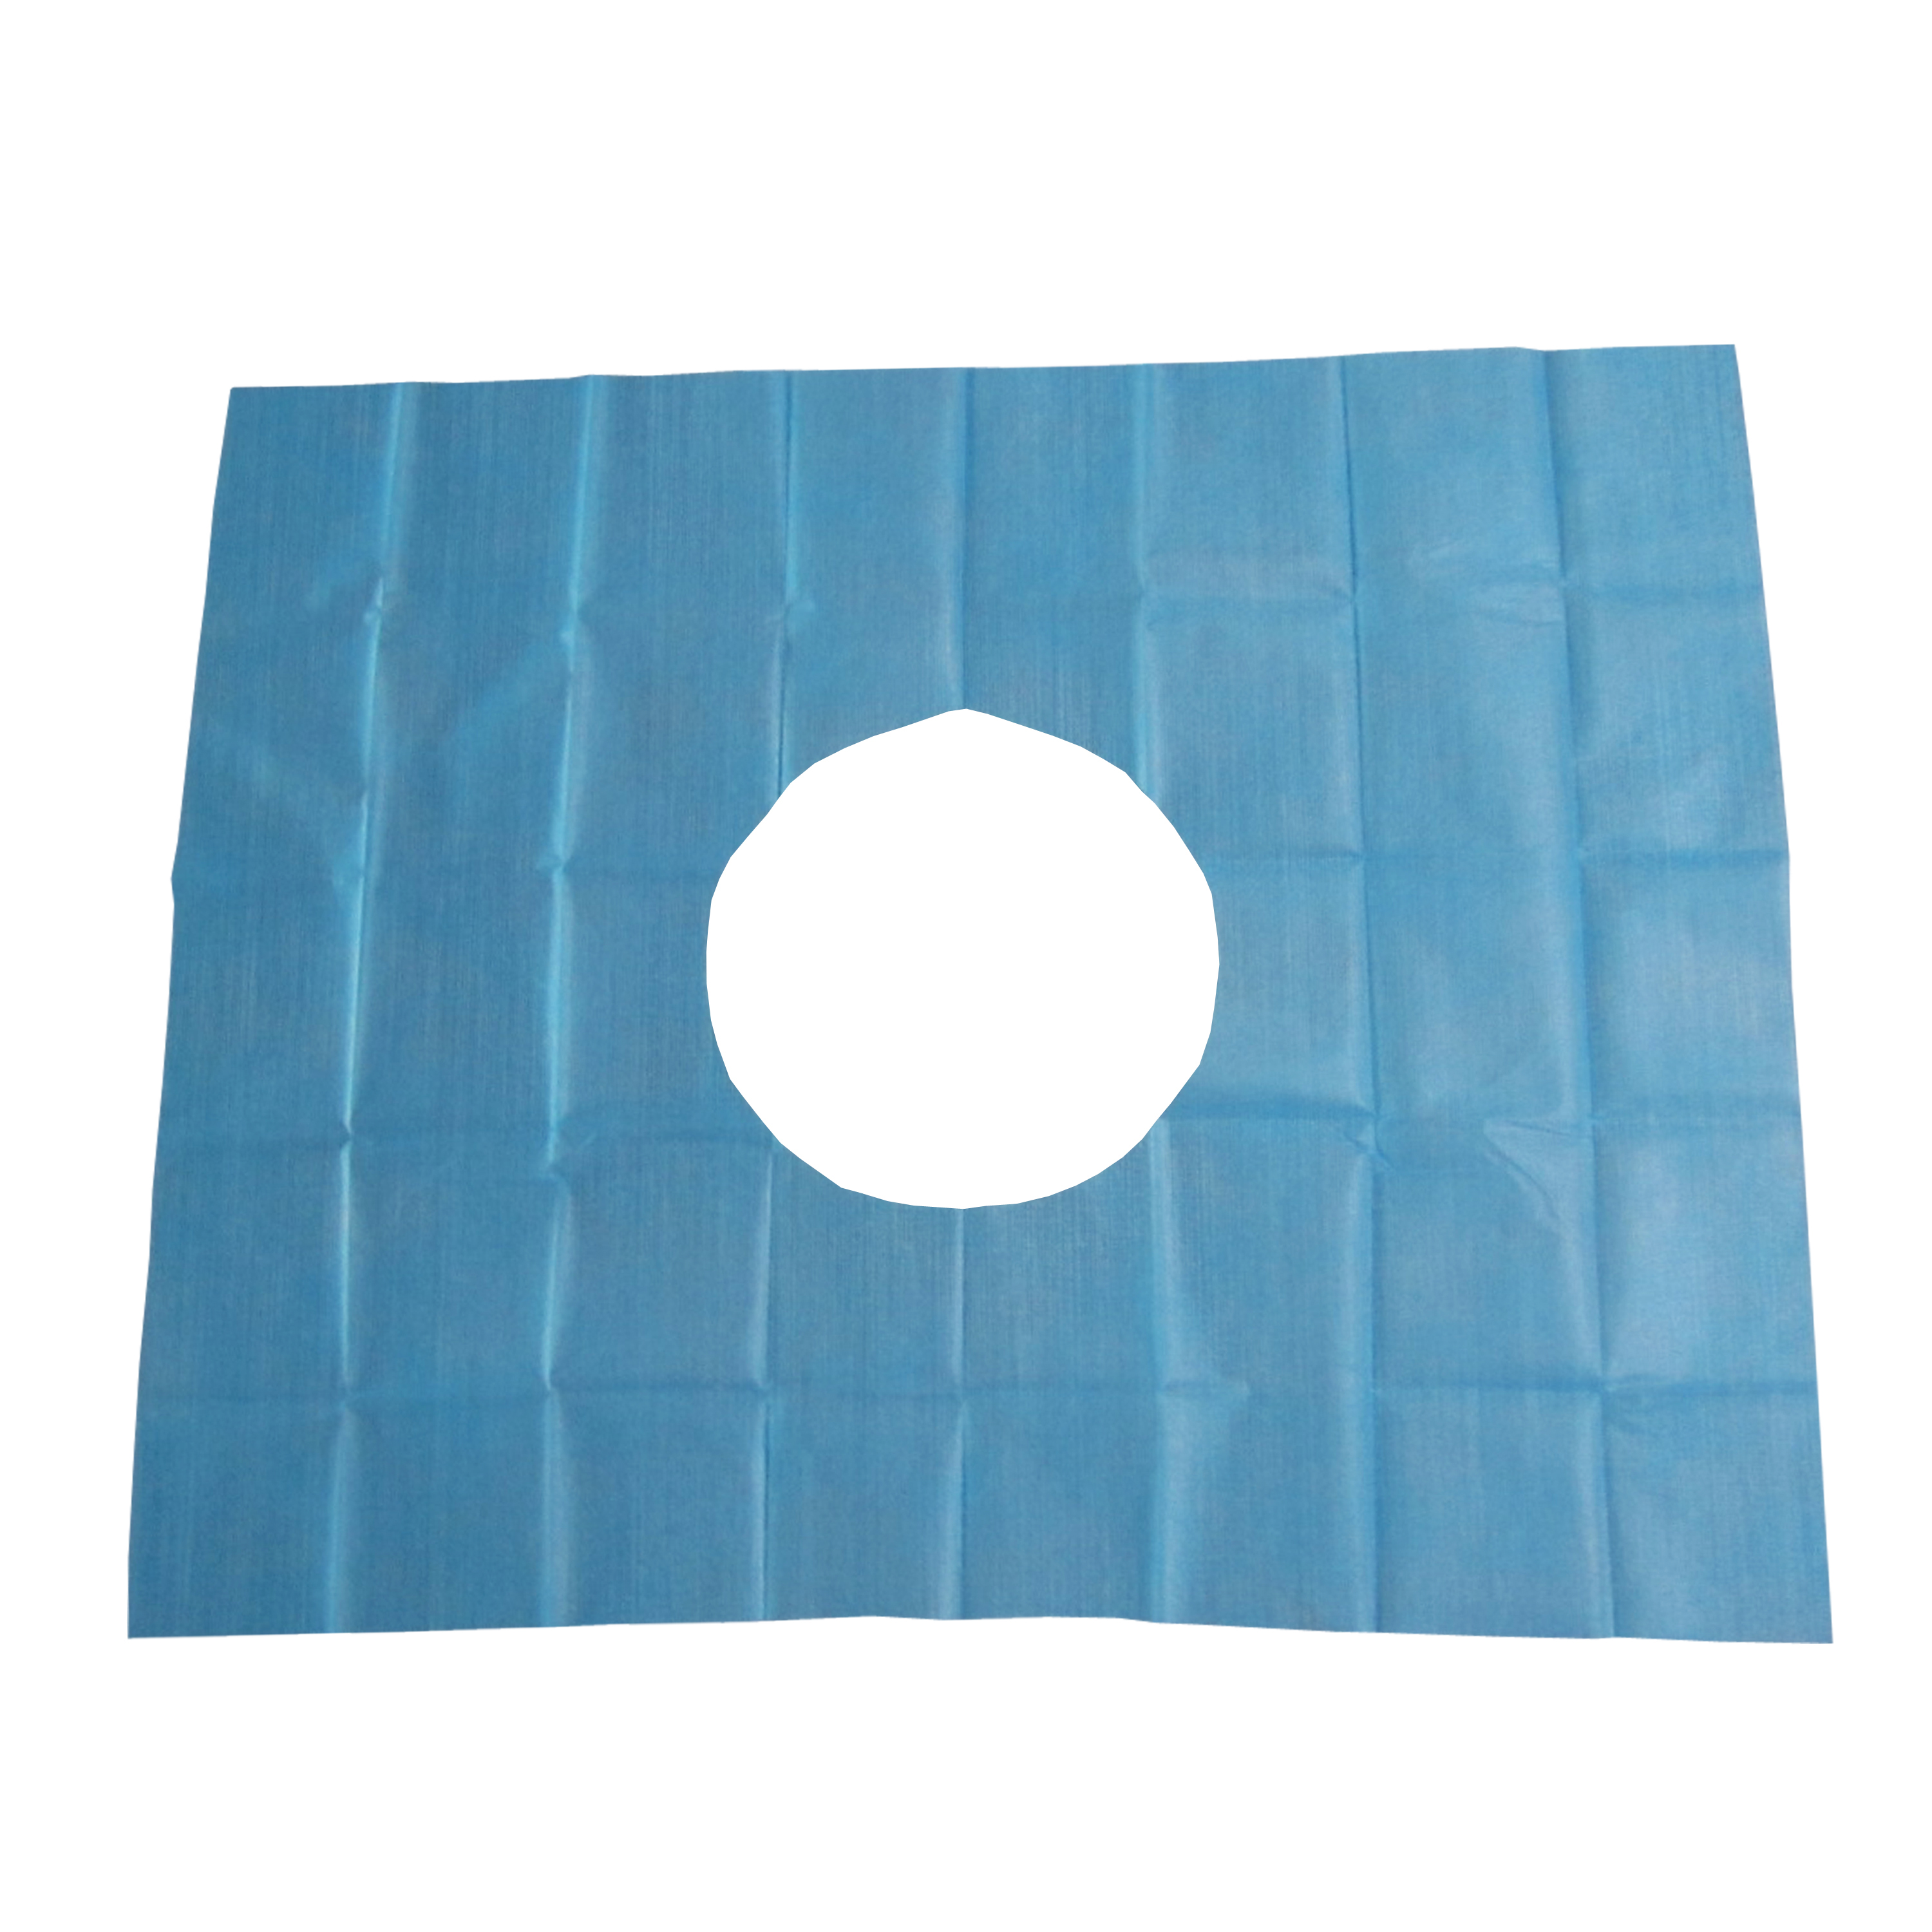 Surgical Fenestrated Drape with Adhesive